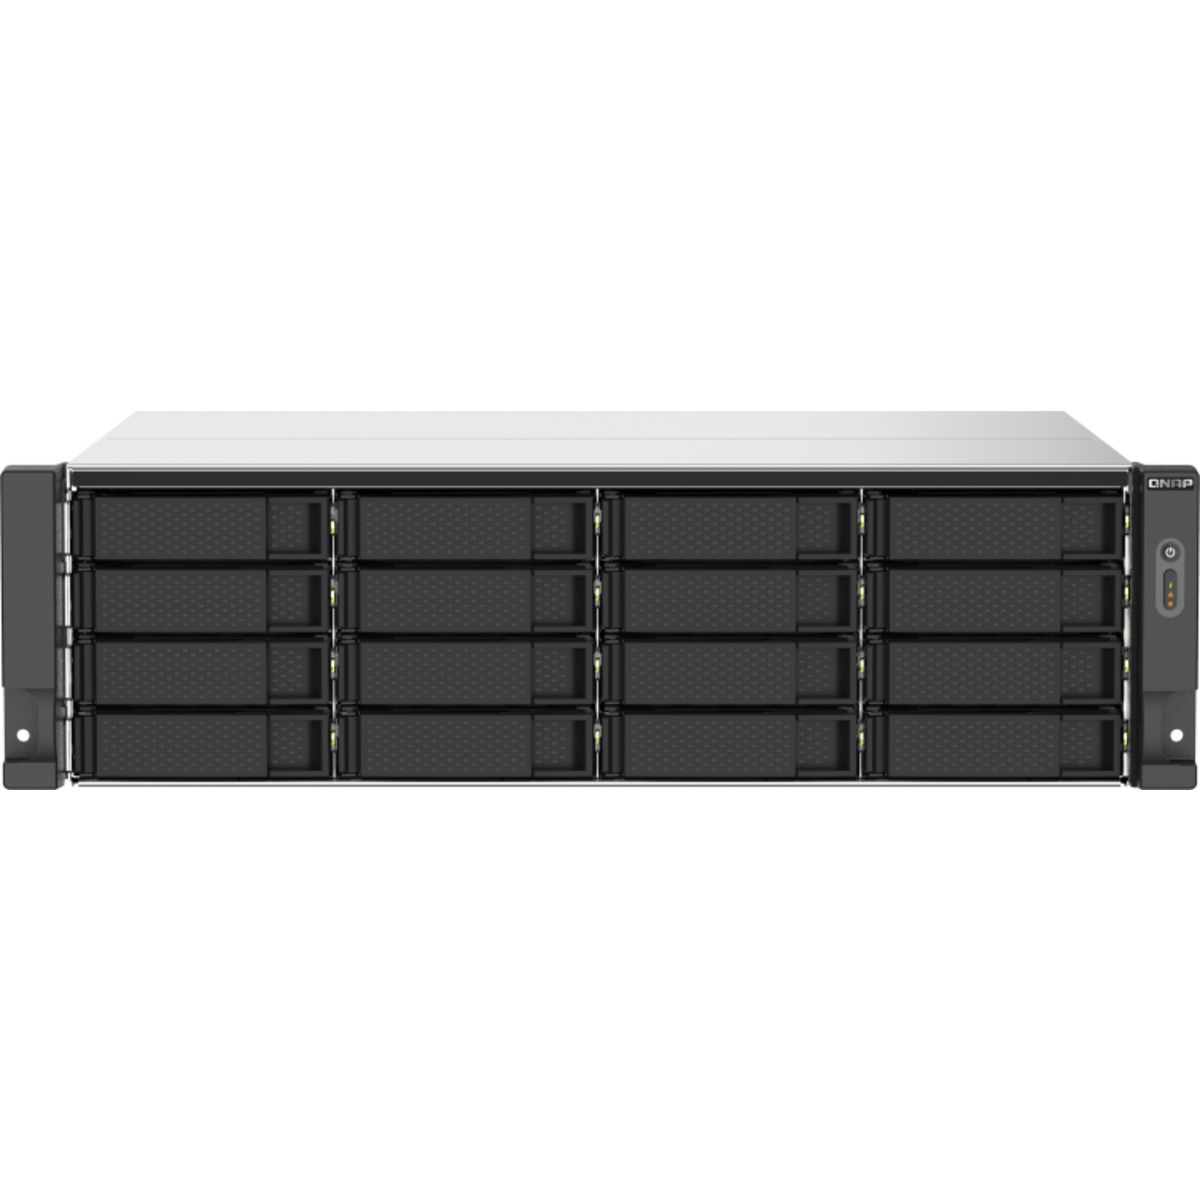 QNAP TS-1673AU-RP 84tb 16-Bay RackMount Multimedia / Power User / Business NAS - Network Attached Storage Device 14x6tb Seagate IronWolf ST6000VN006 3.5 5400rpm SATA 6Gb/s HDD NAS Class Drives Installed - Burn-In Tested - FREE RAM UPGRADE TS-1673AU-RP